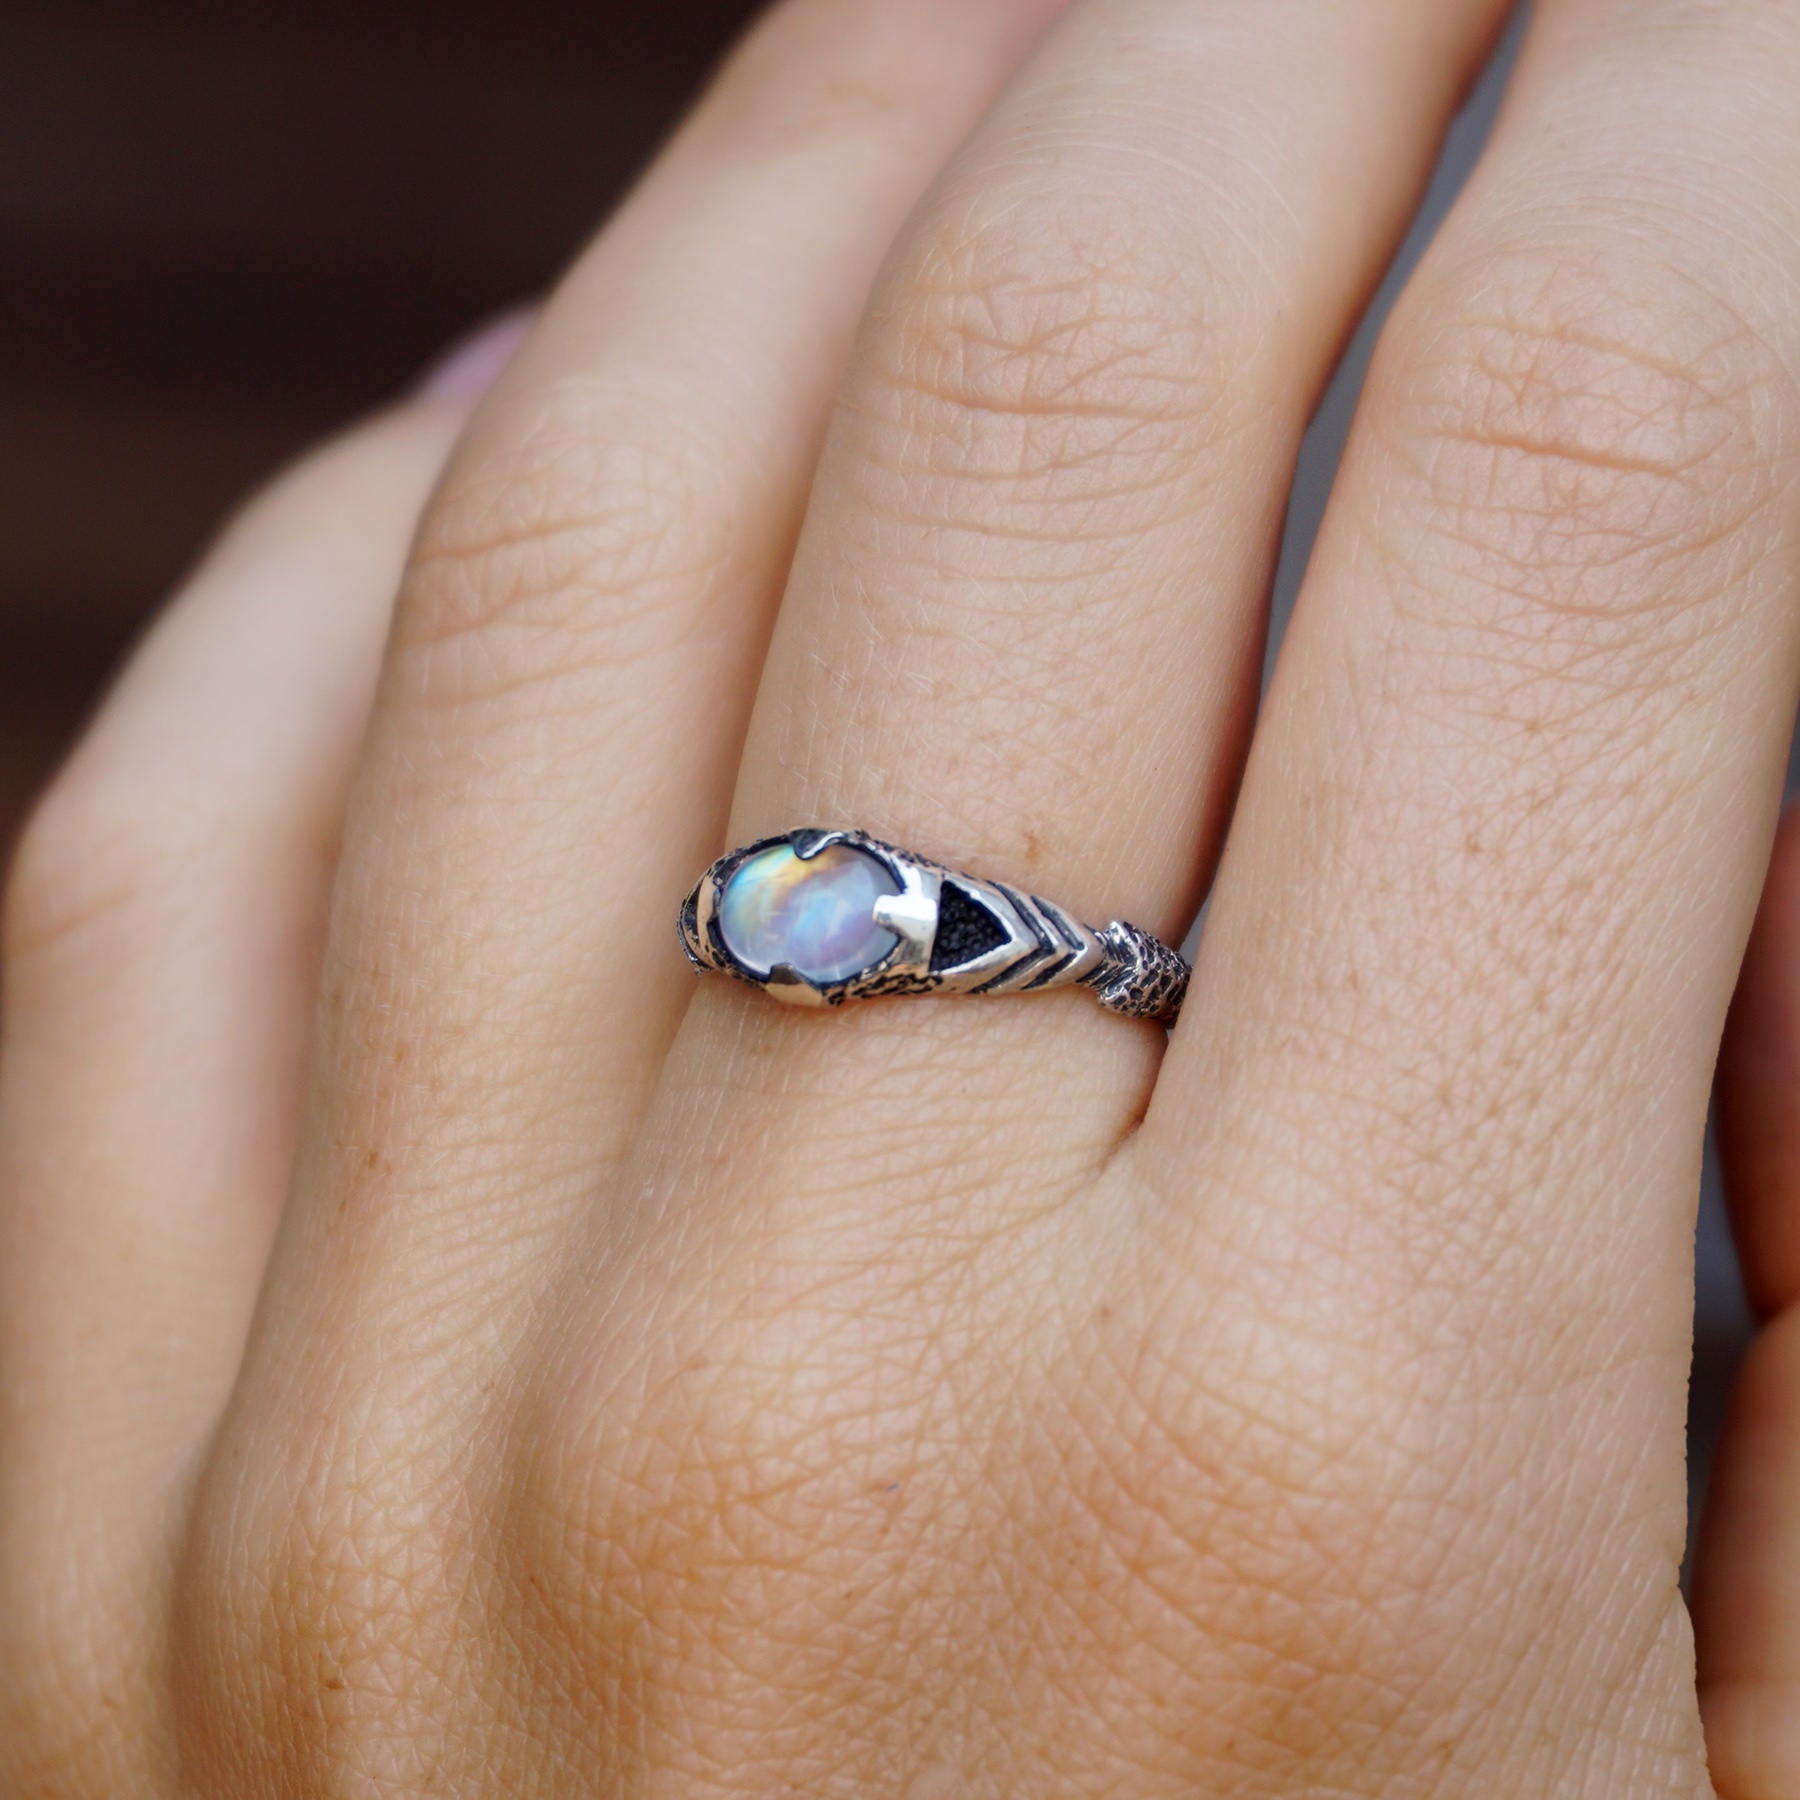 Mens Moonstone ring, Unique Mens ring, Pinky silver ring, Signet stone ring, June Birthstone ring, Mens silver ring 